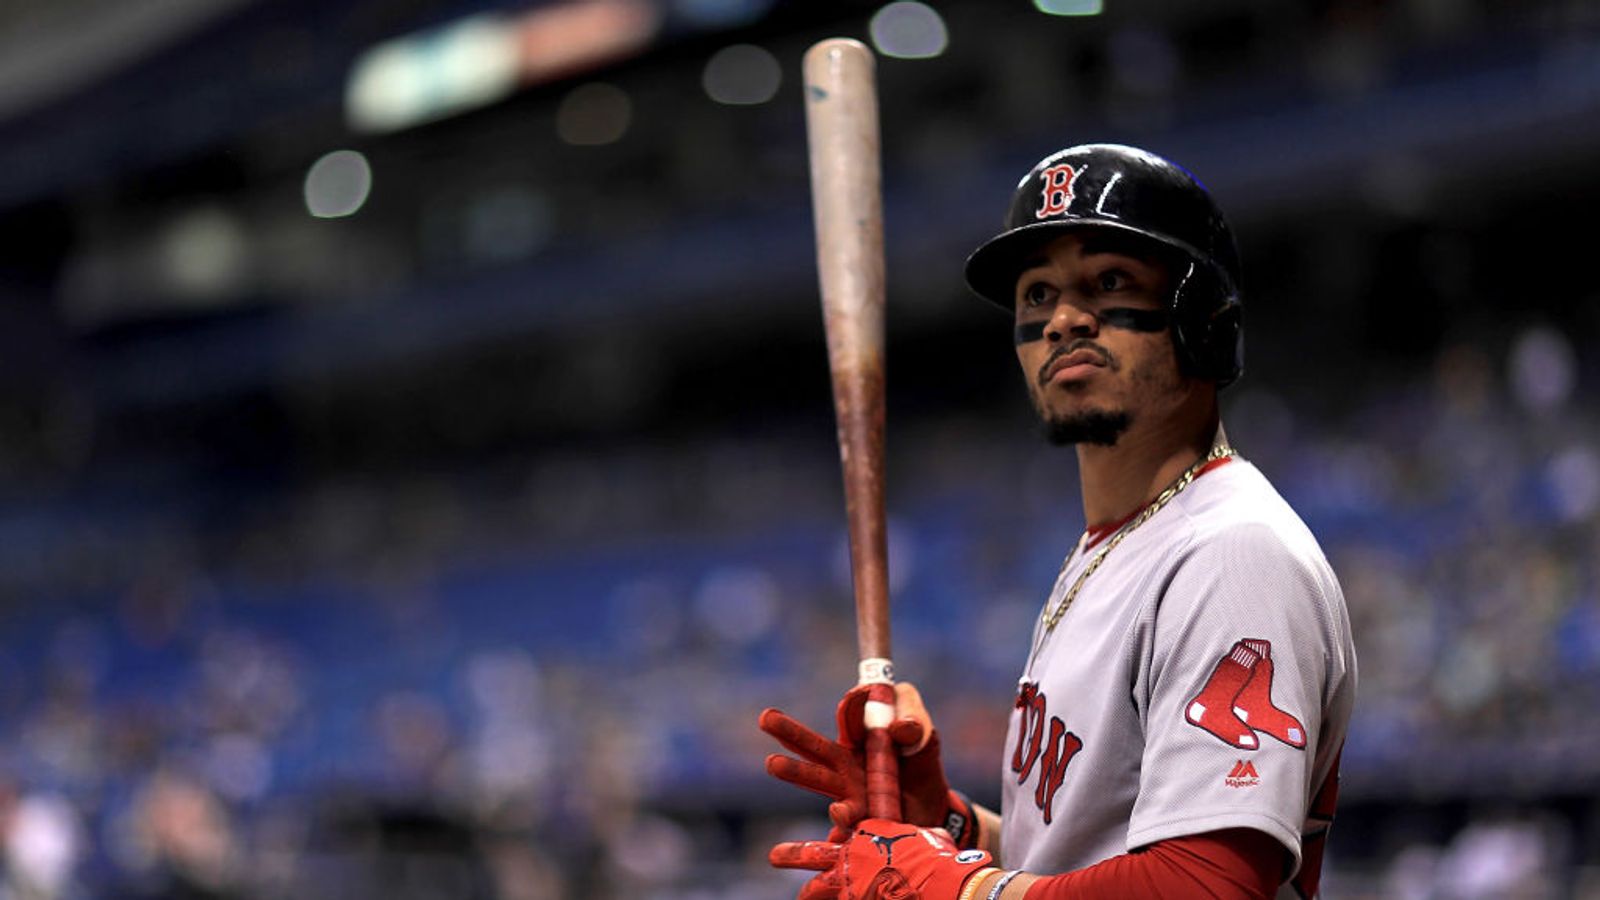 Mookie Betts focused on job at hand with Red Sox